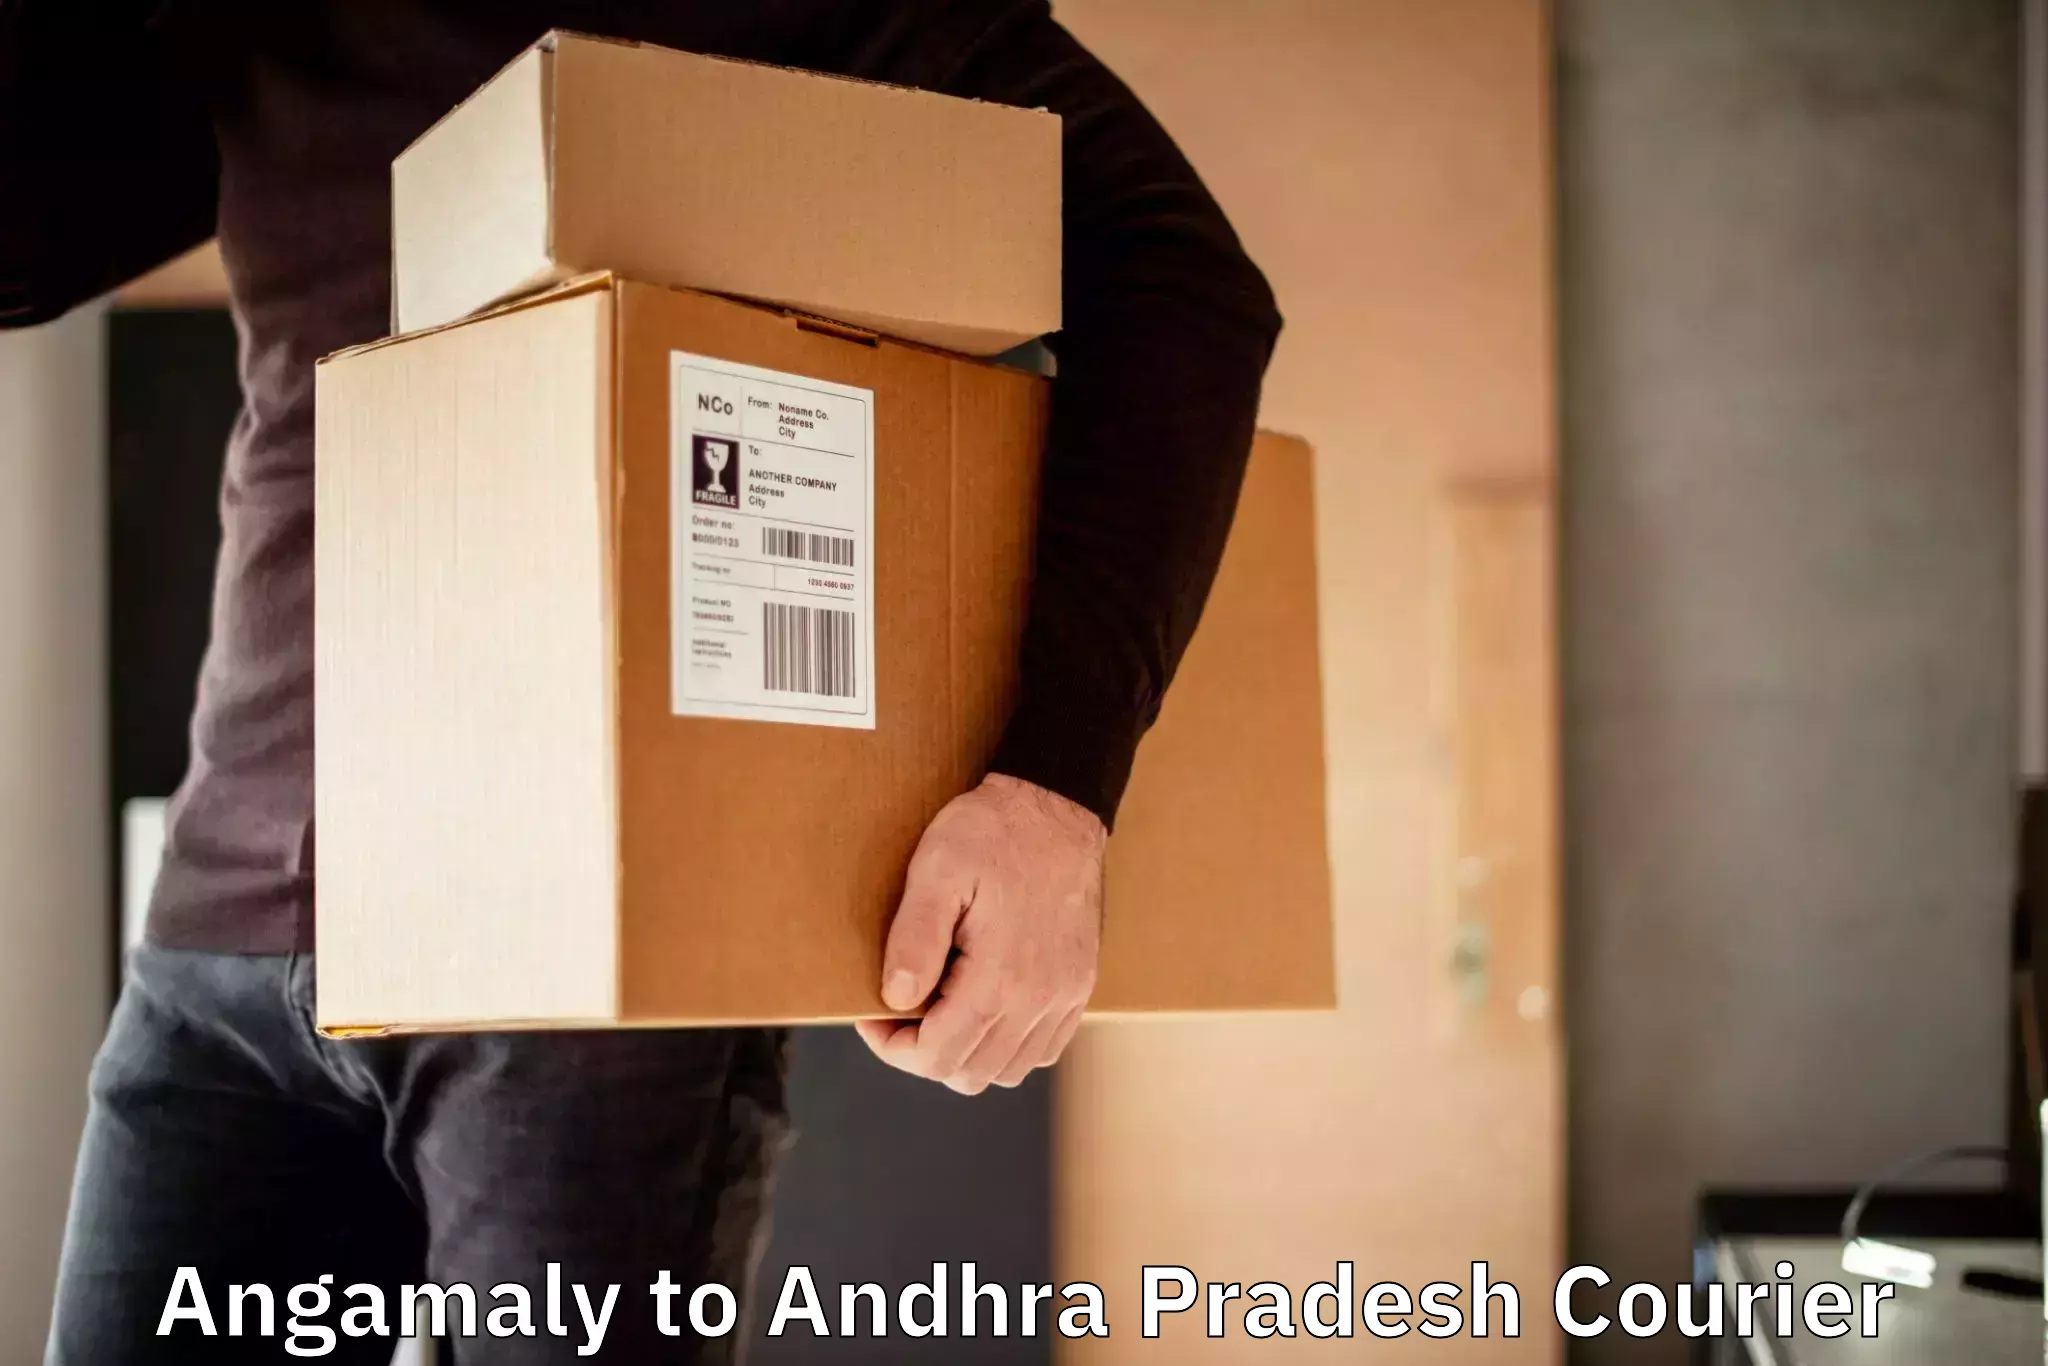 Easy access courier services Angamaly to Yerravaram